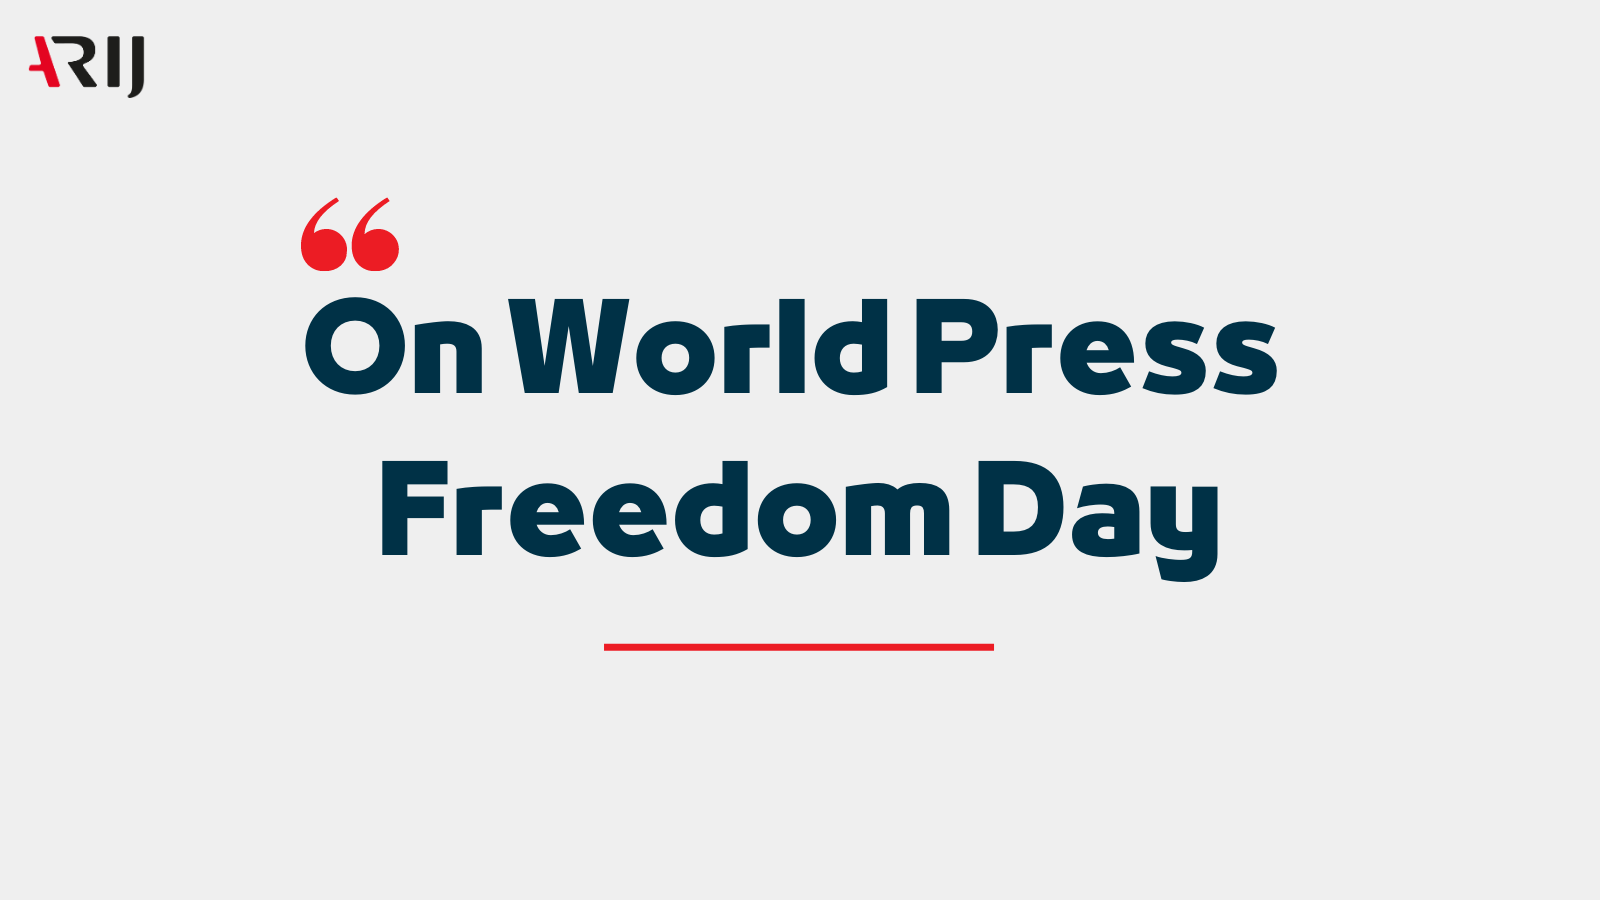 Activities and Digital Campaigns on Social Media... ARIJ Celebrates World Press Freedom Day